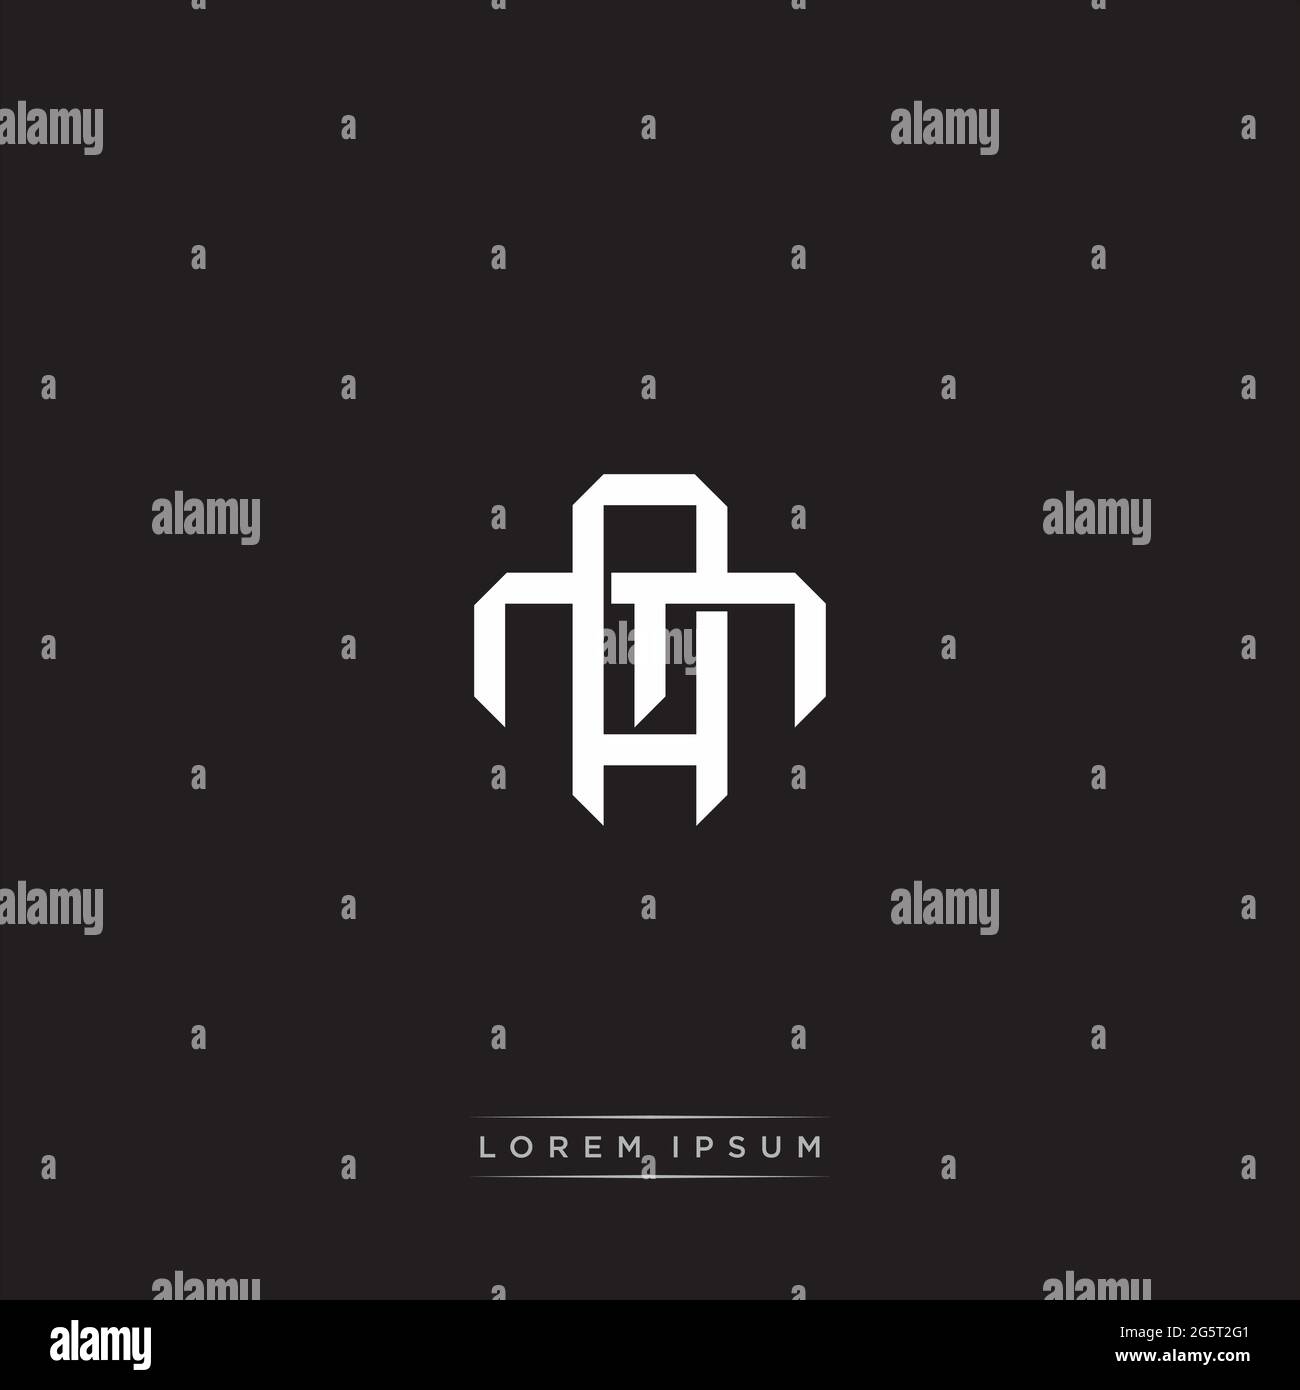 Monogram Initials Am Or Ma Letters Logo Design Mockup Overlapping